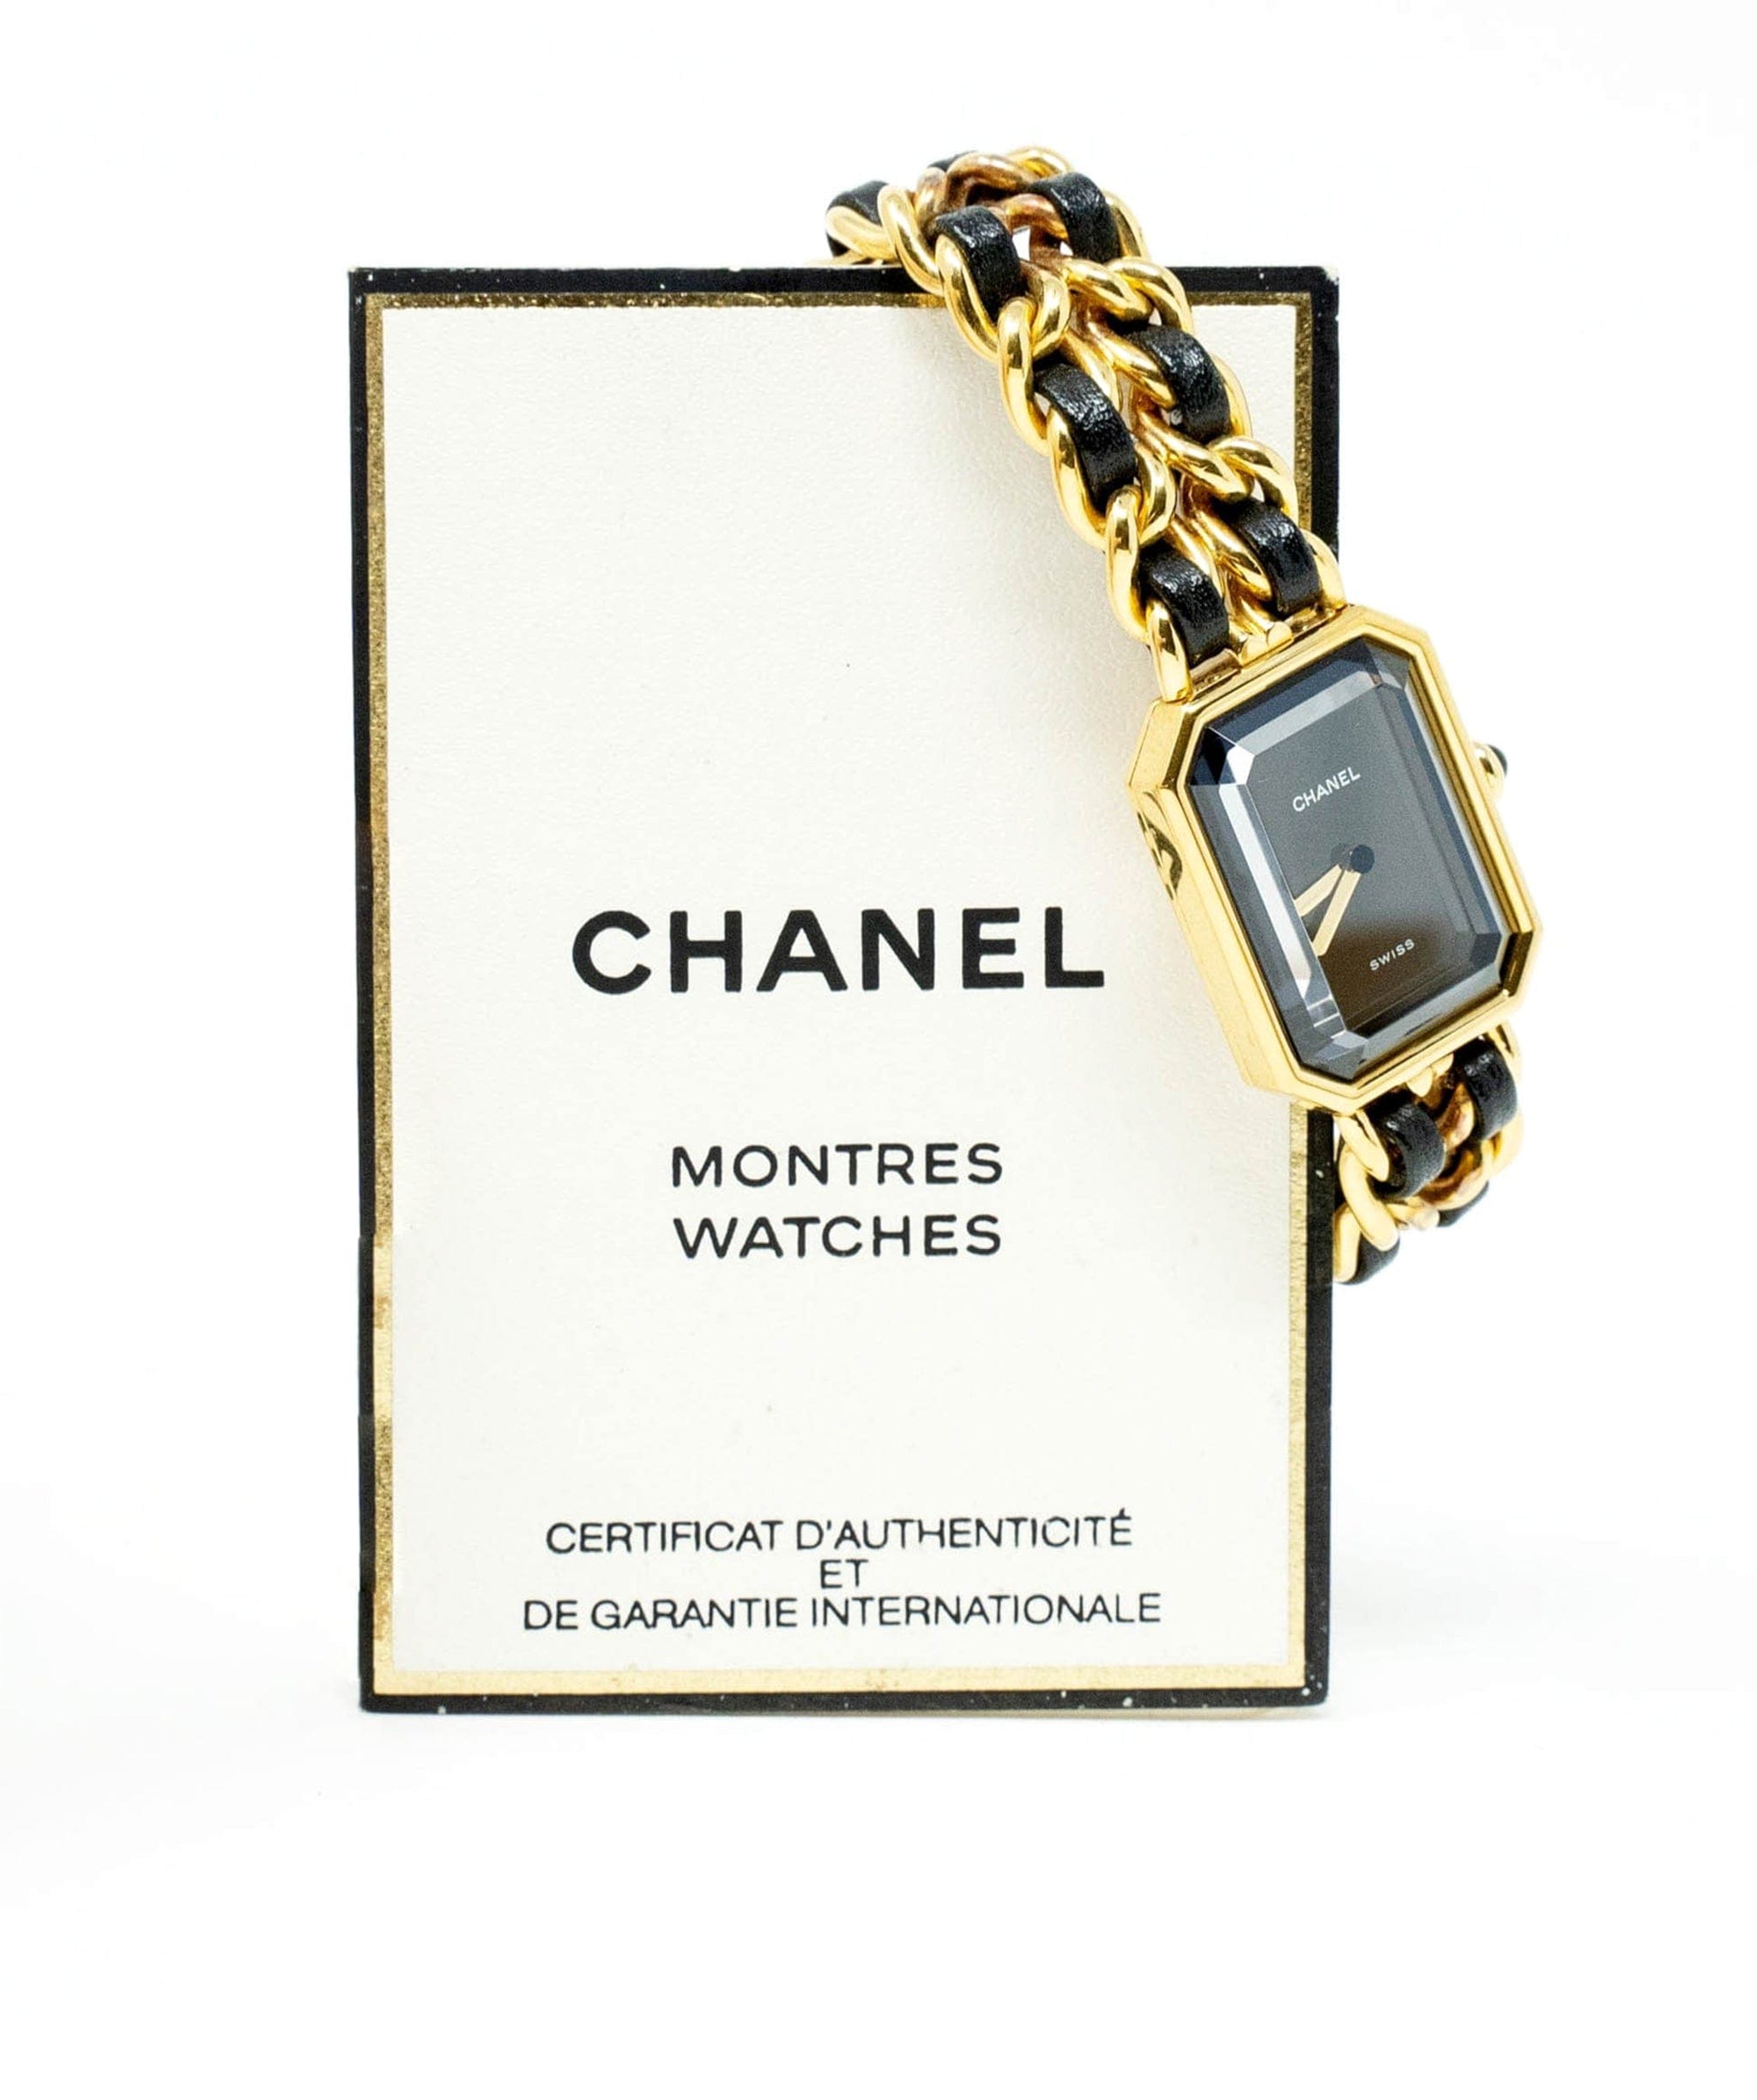 Chanel Chanel Premiere watch with GHW ASL4421